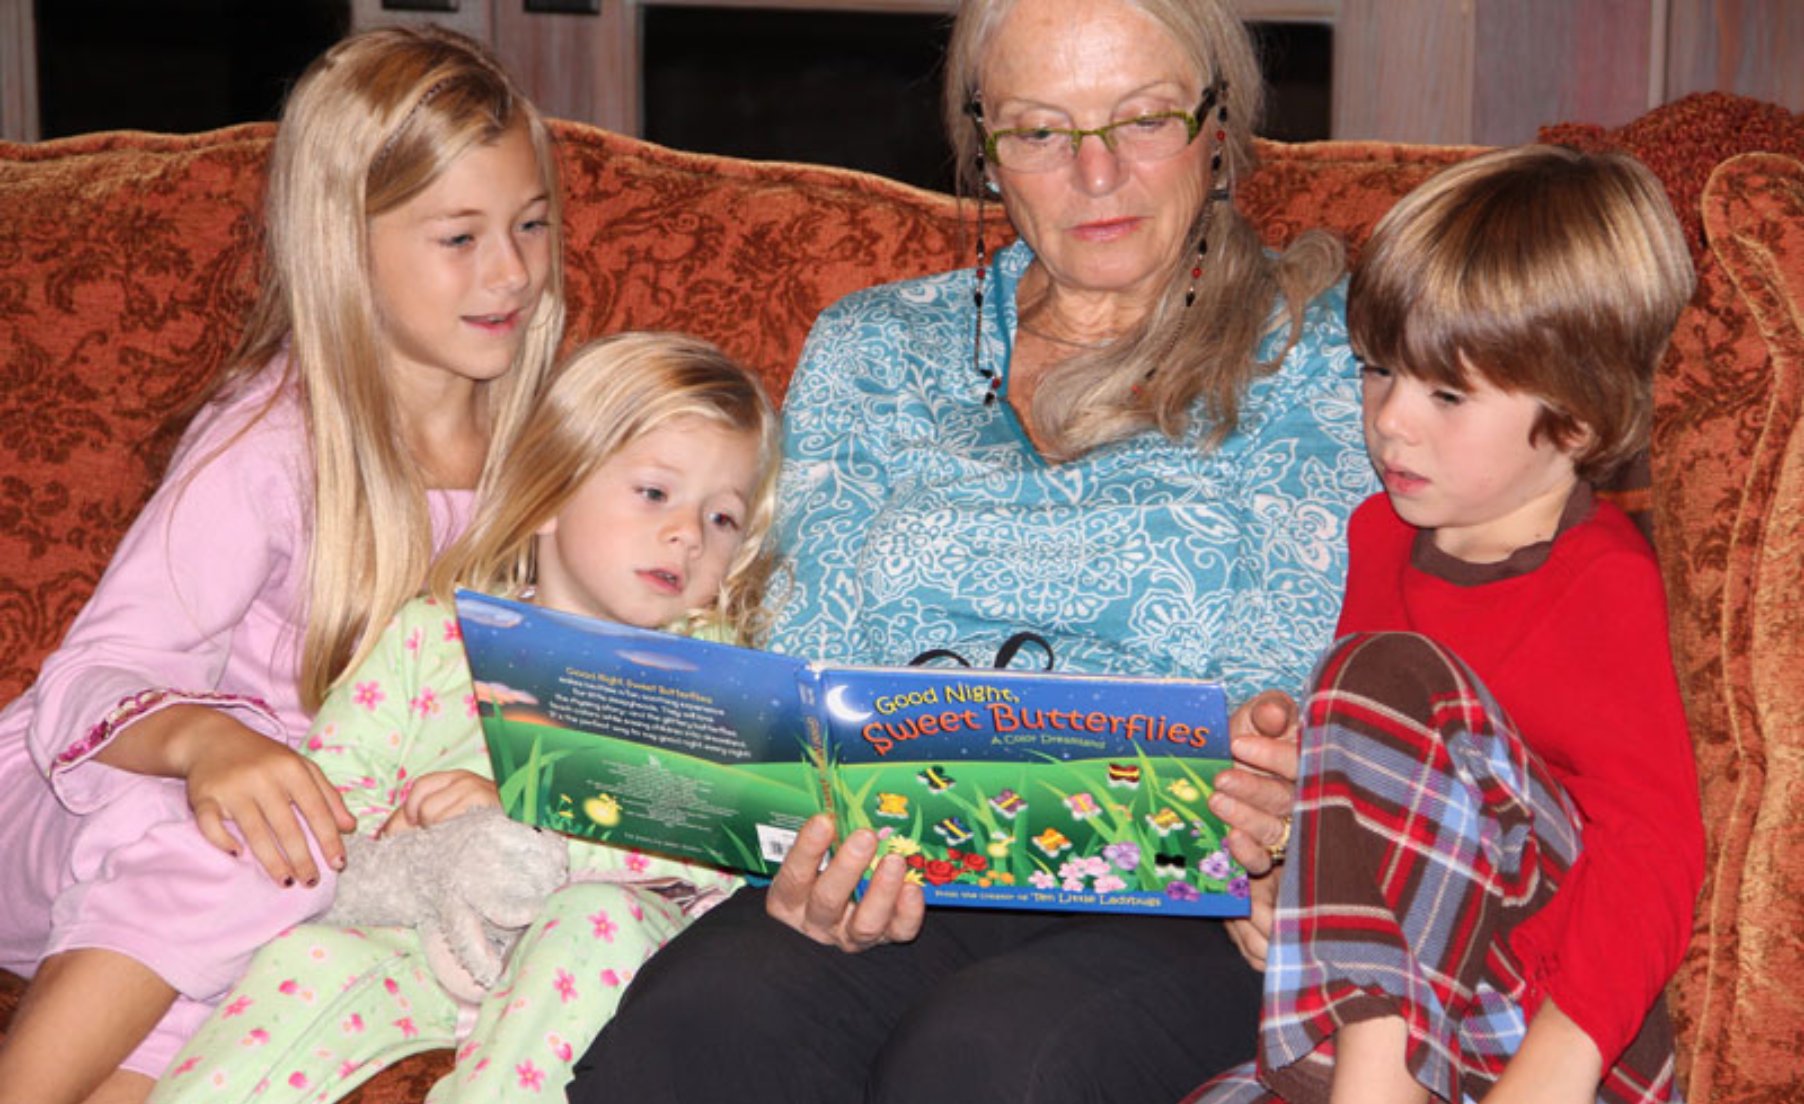 Bedtime stories being read